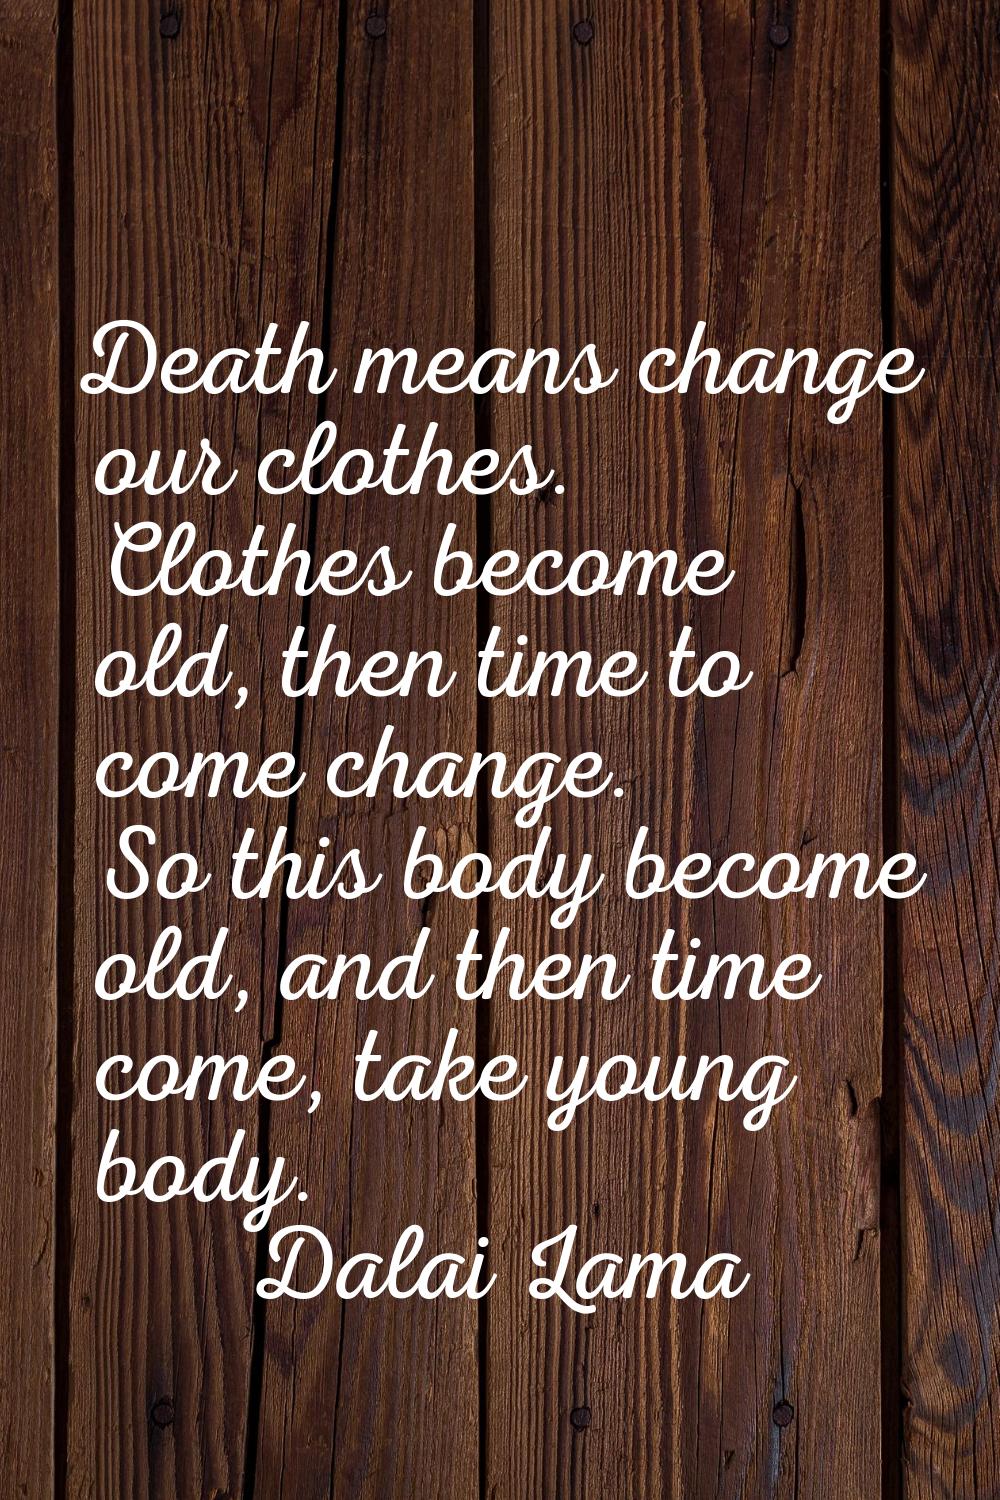 Death means change our clothes. Clothes become old, then time to come change. So this body become o